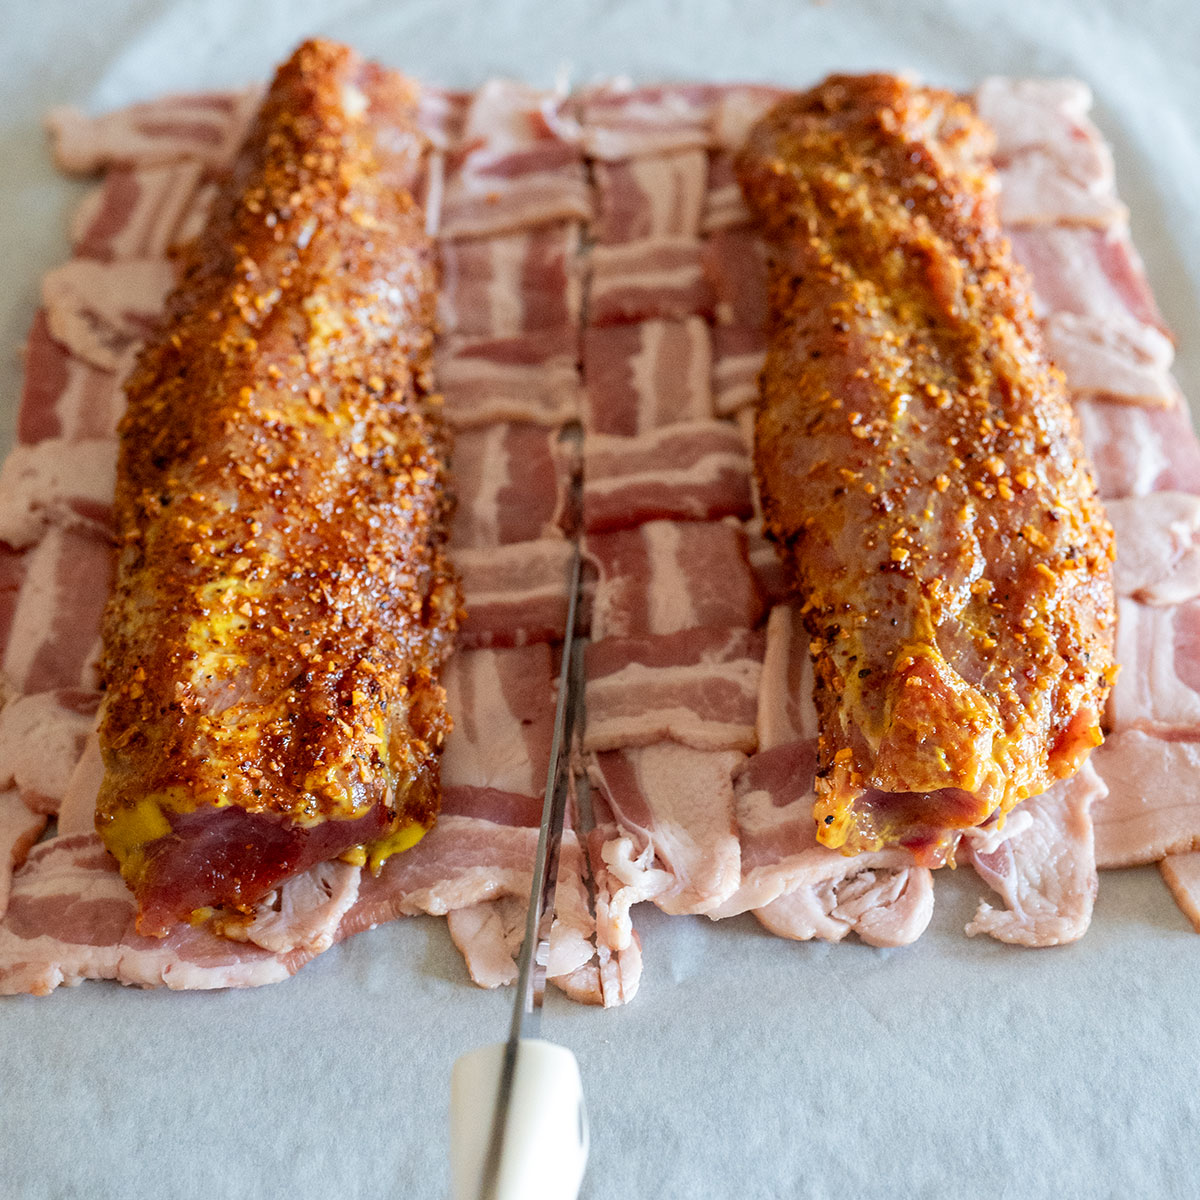 two pork tenderloins on bacon weave while knife is slicing weave in half.